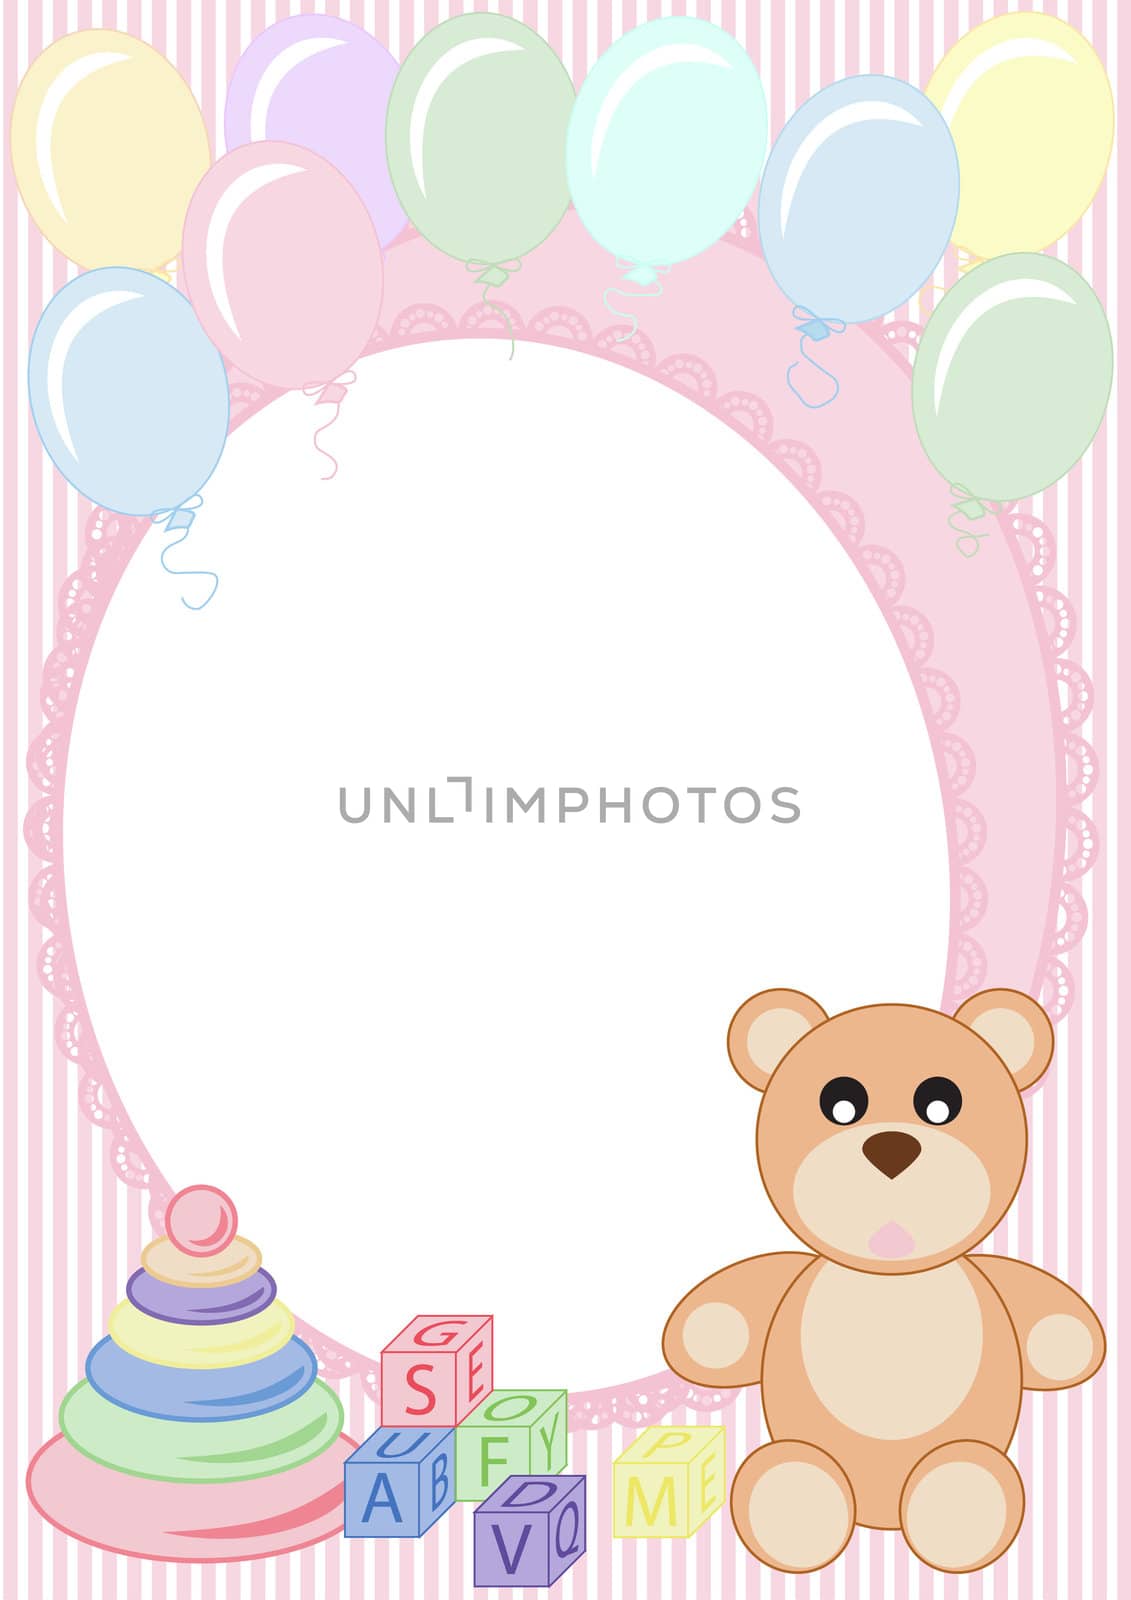 congratulations on a striped background with a teddy bear and balloons